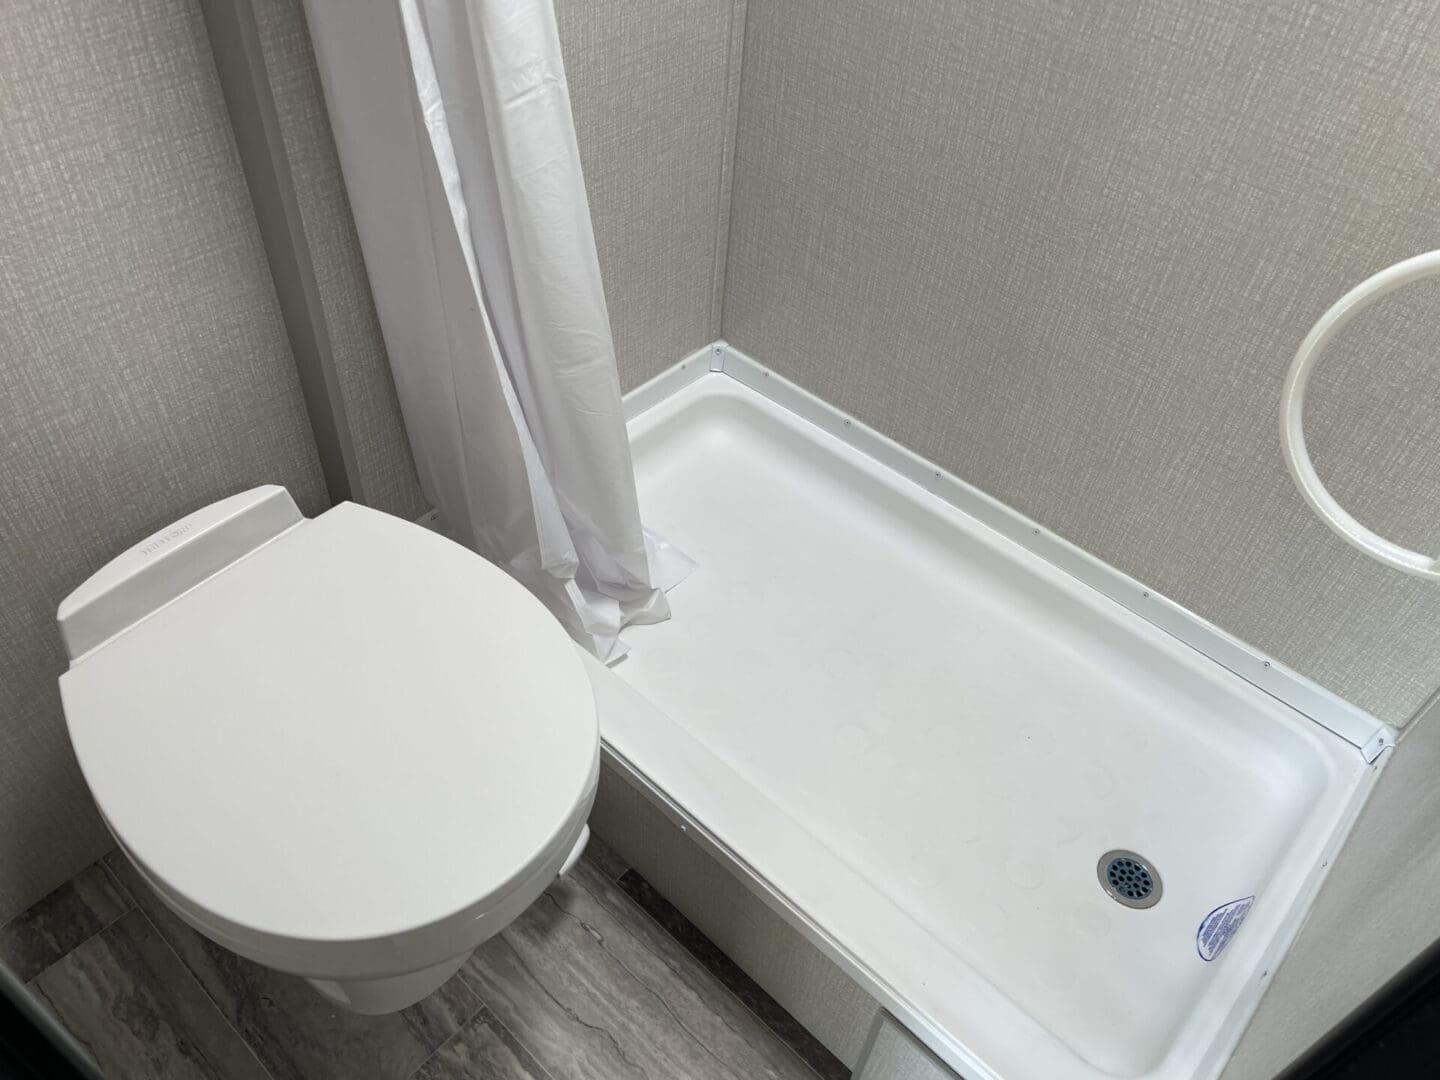 A bathtub and the toilet seat on the wooden flooring